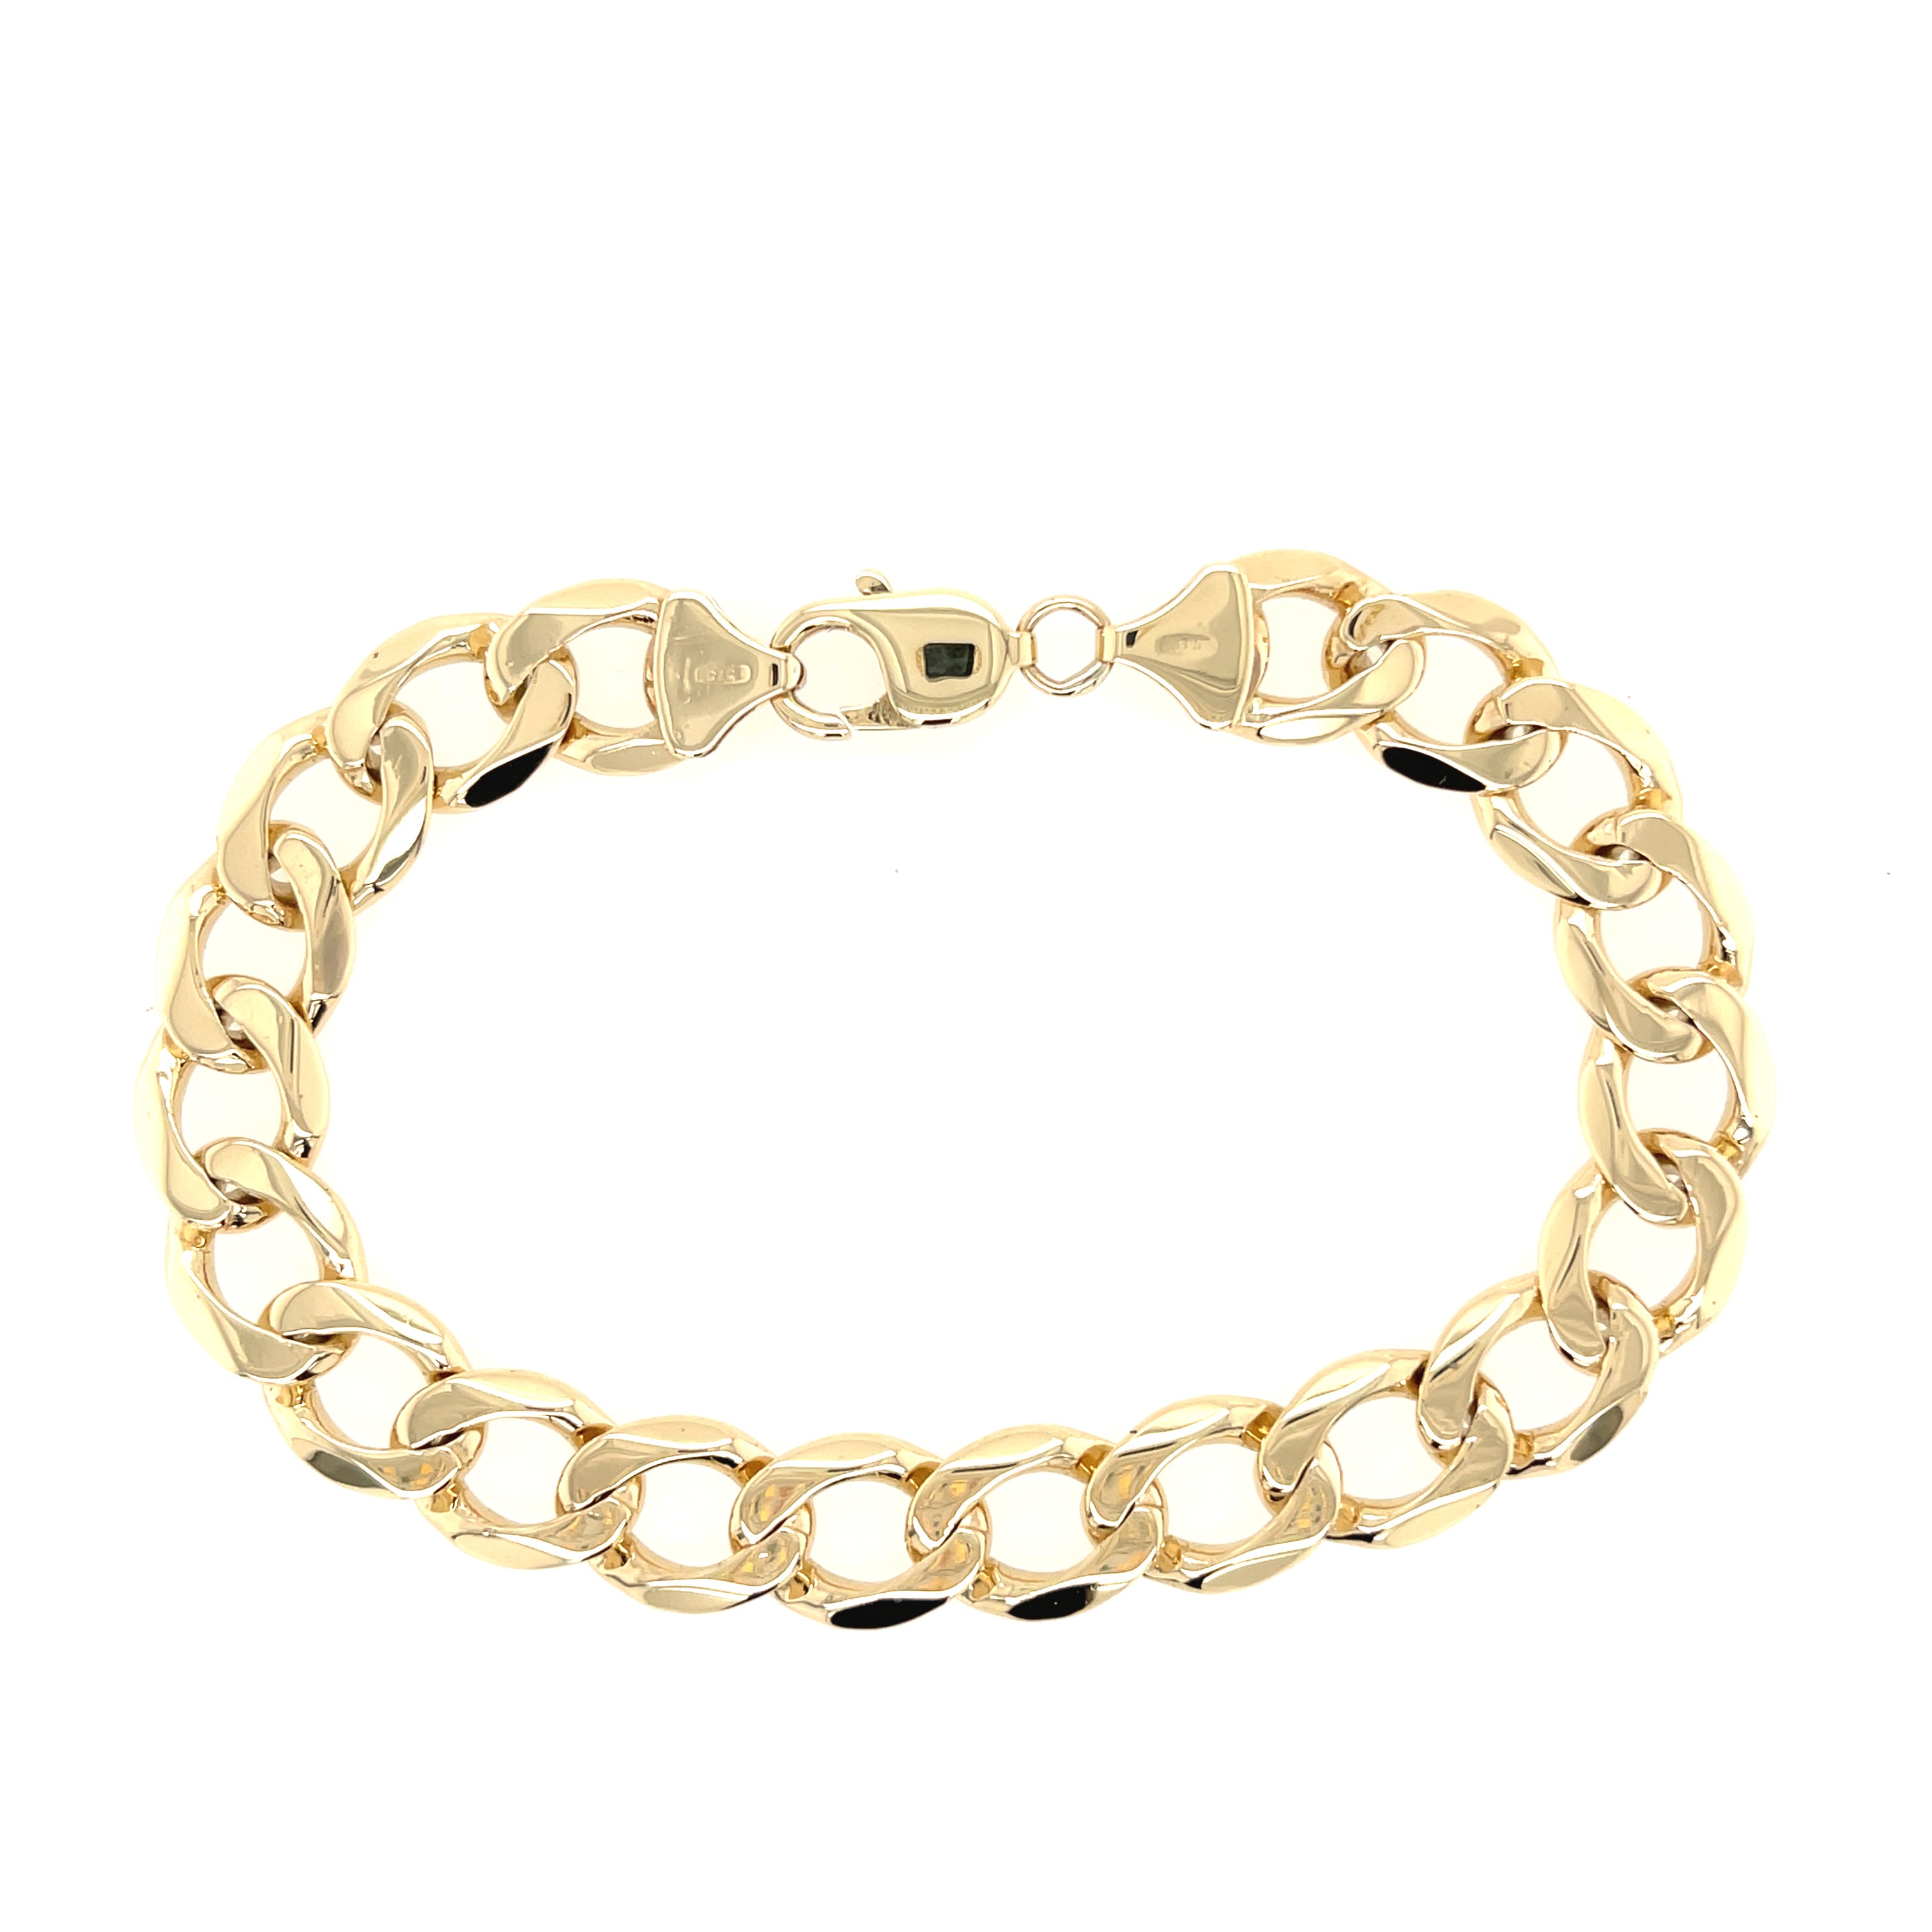 9ct Yellow Gold 9.5"Inch Curb Link Bracelet - 33.96g